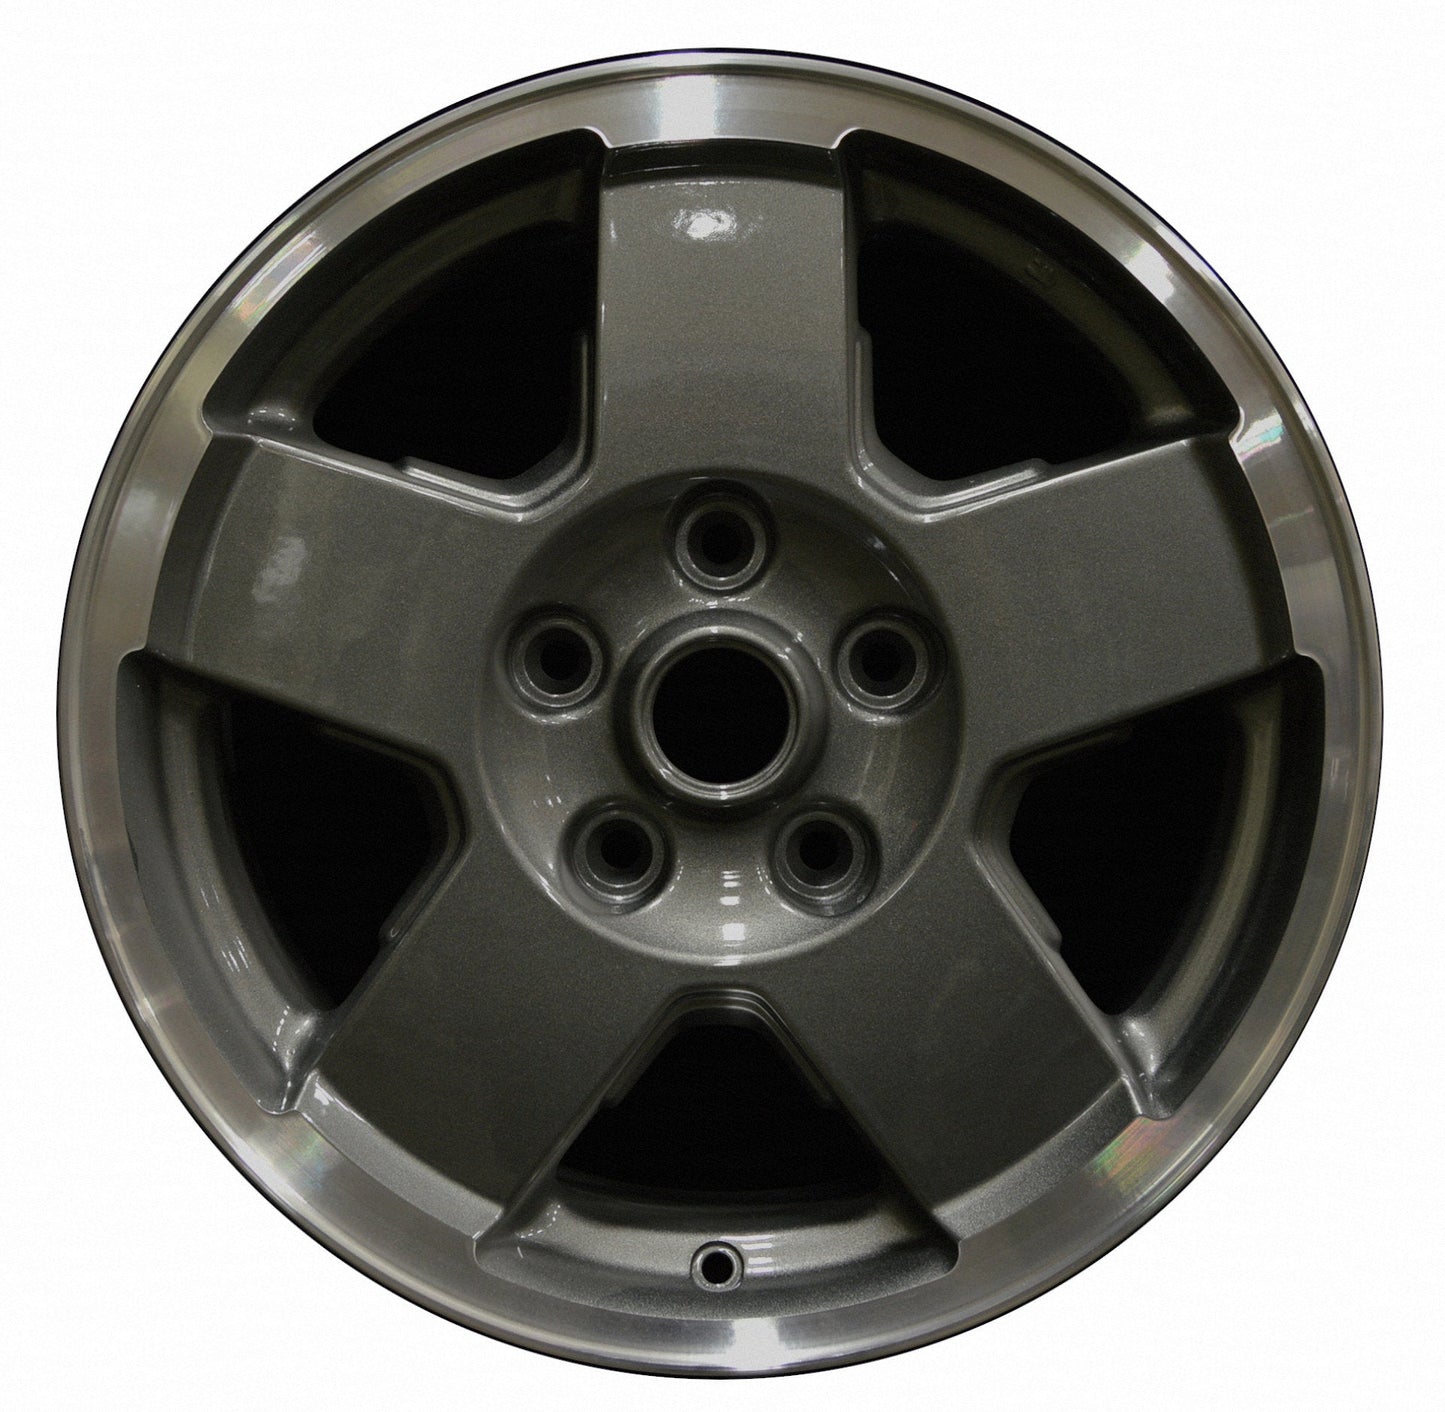 Jeep Commander  2006, 2007, 2008, 2009, 2010 Factory OEM Car Wheel Size 17x7.5 Alloy WAO.9096.LC29.FC